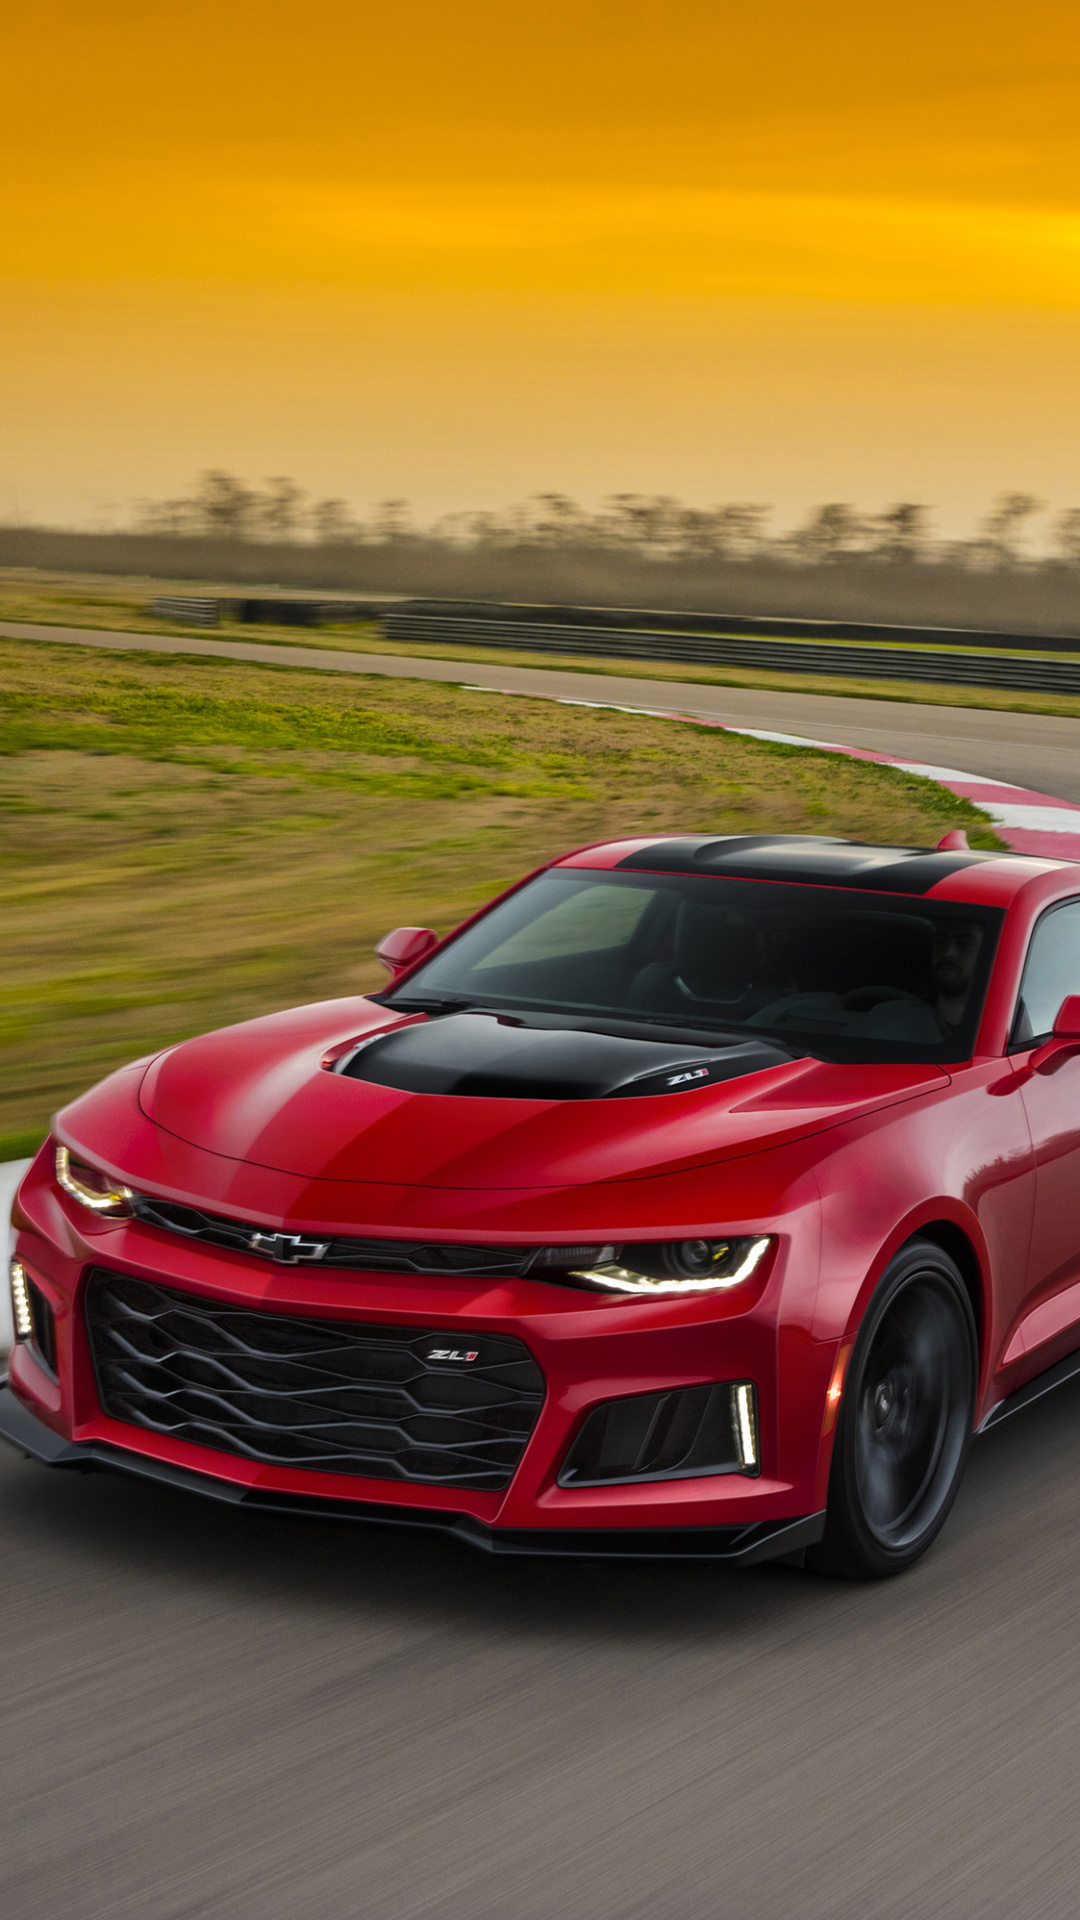 Chevrolet Camaro ZL1 phone wallpaper, Mobile customization, Personalize your screen, High-powered beauty, Free download, 1080x1920 Full HD Handy